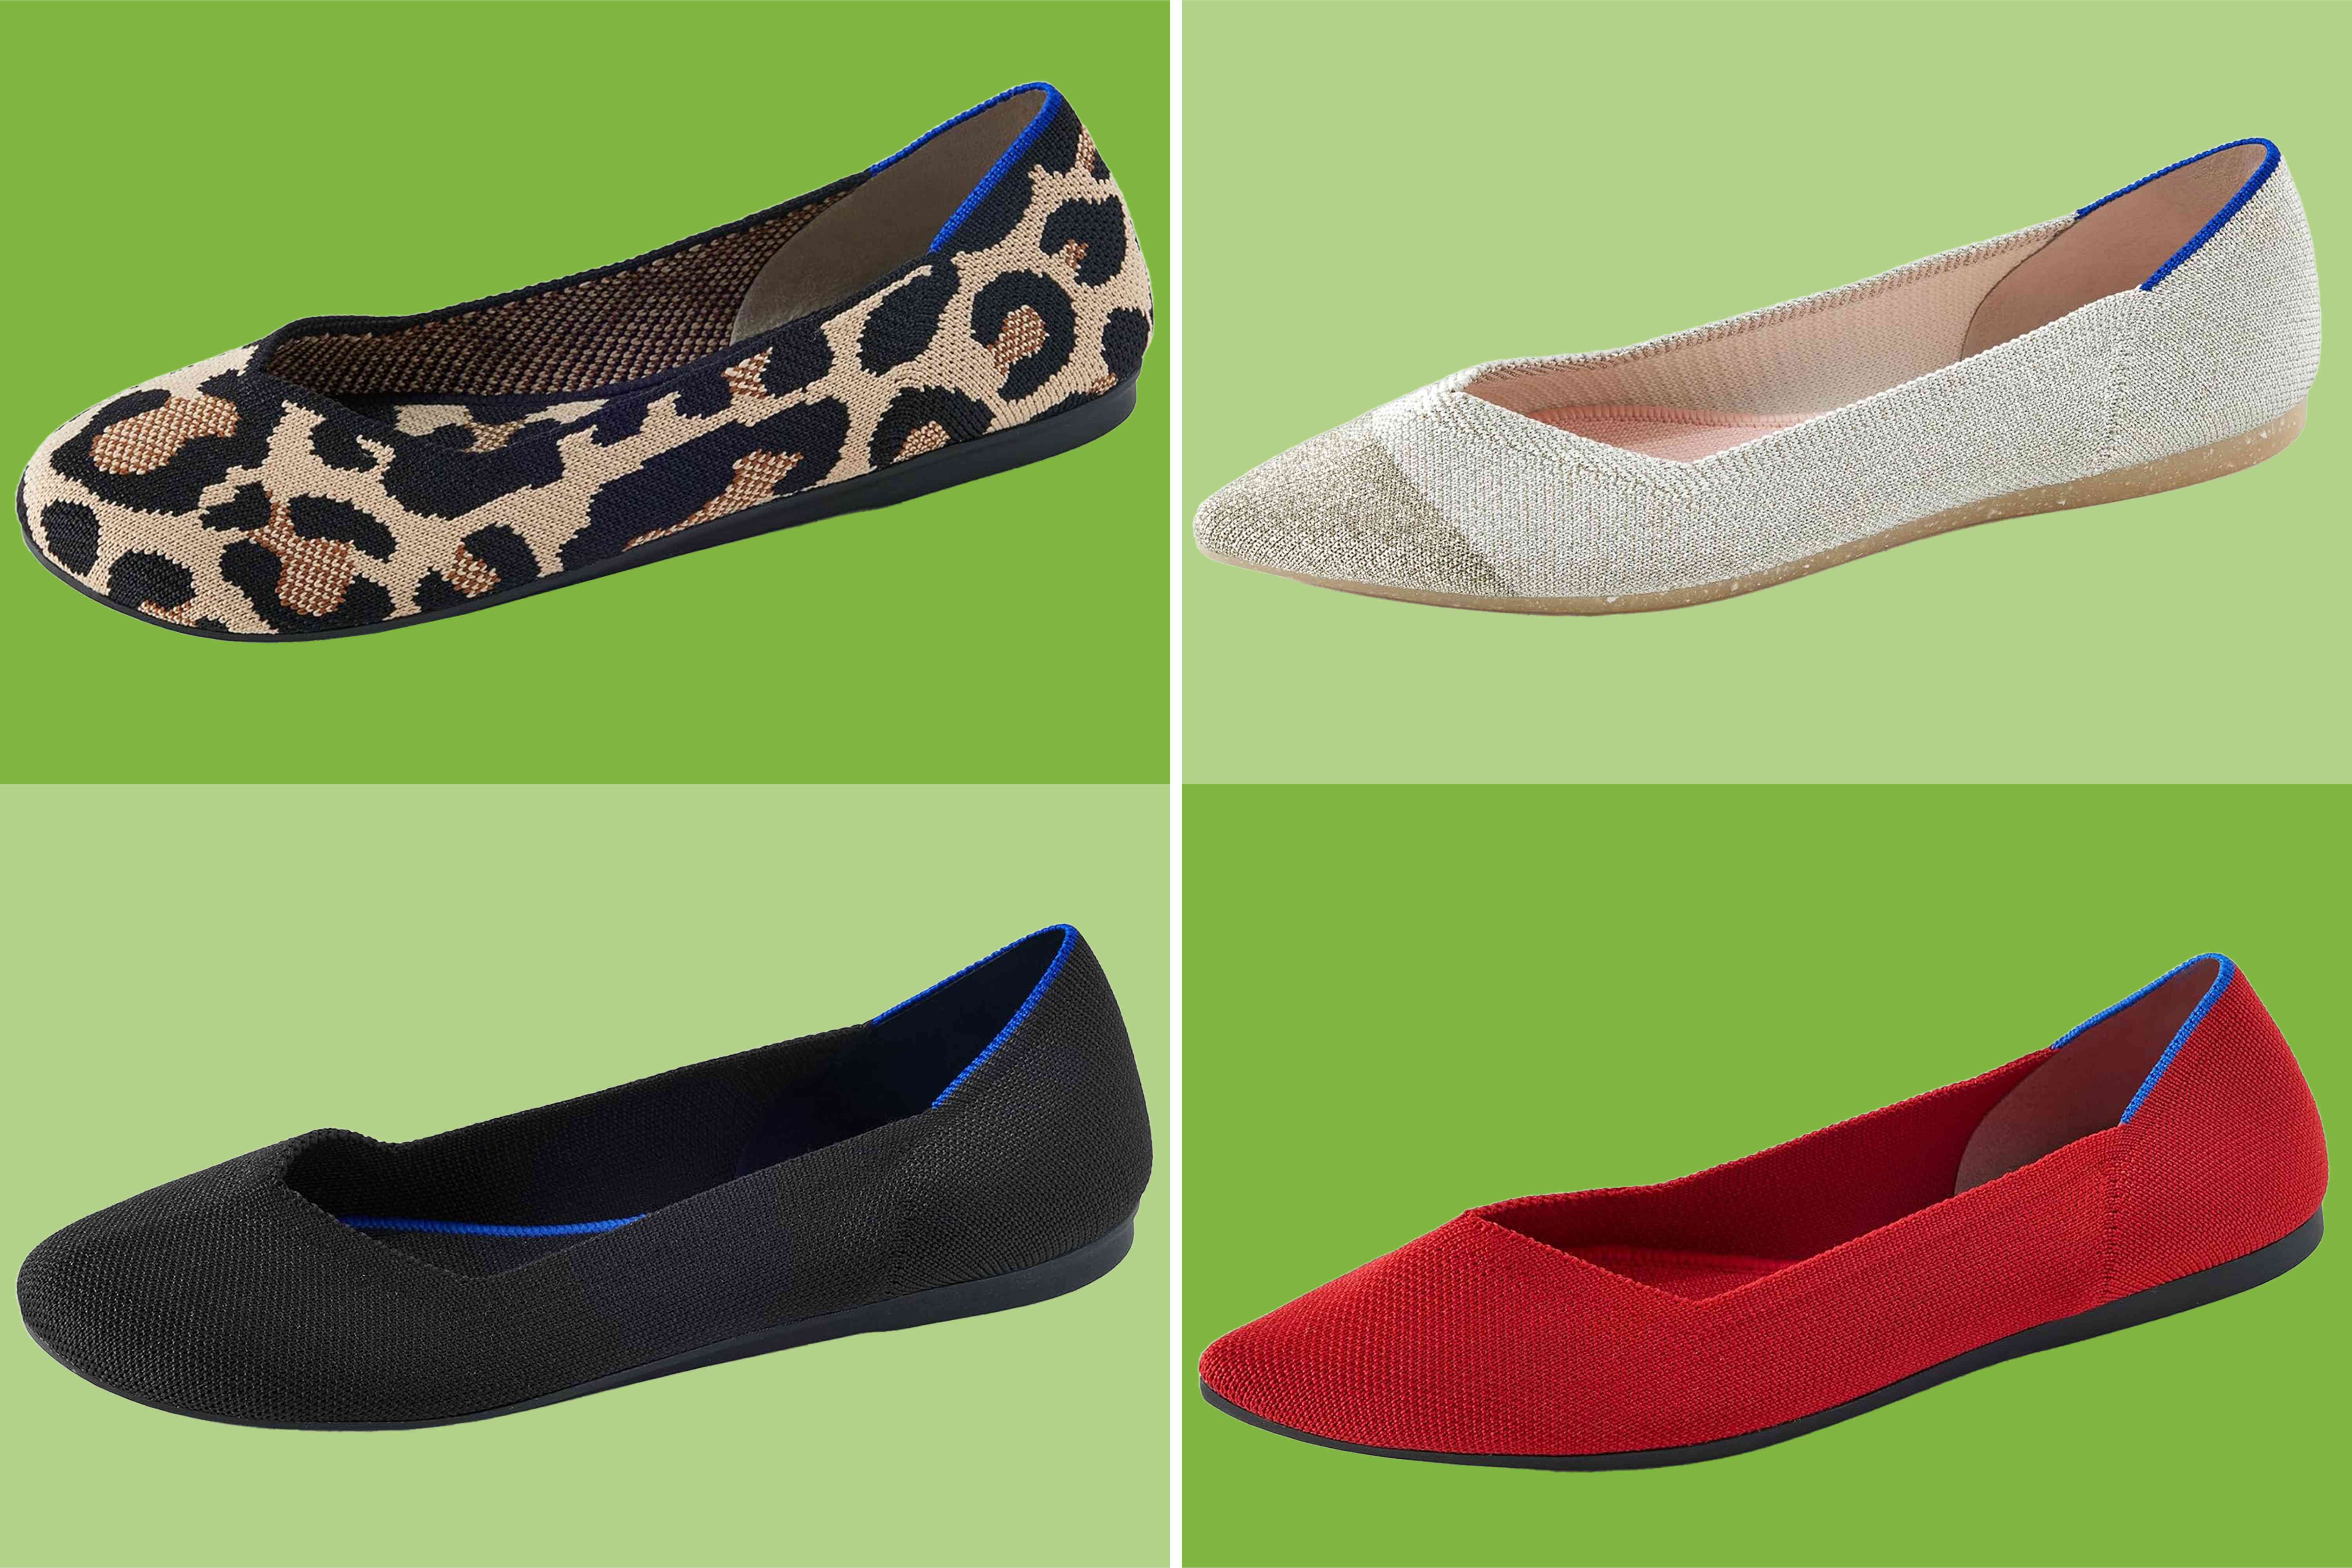 Rothy’s Flexible Knit Flats Are Now Available to Shop at Amazon with Free 2-Day Shipping